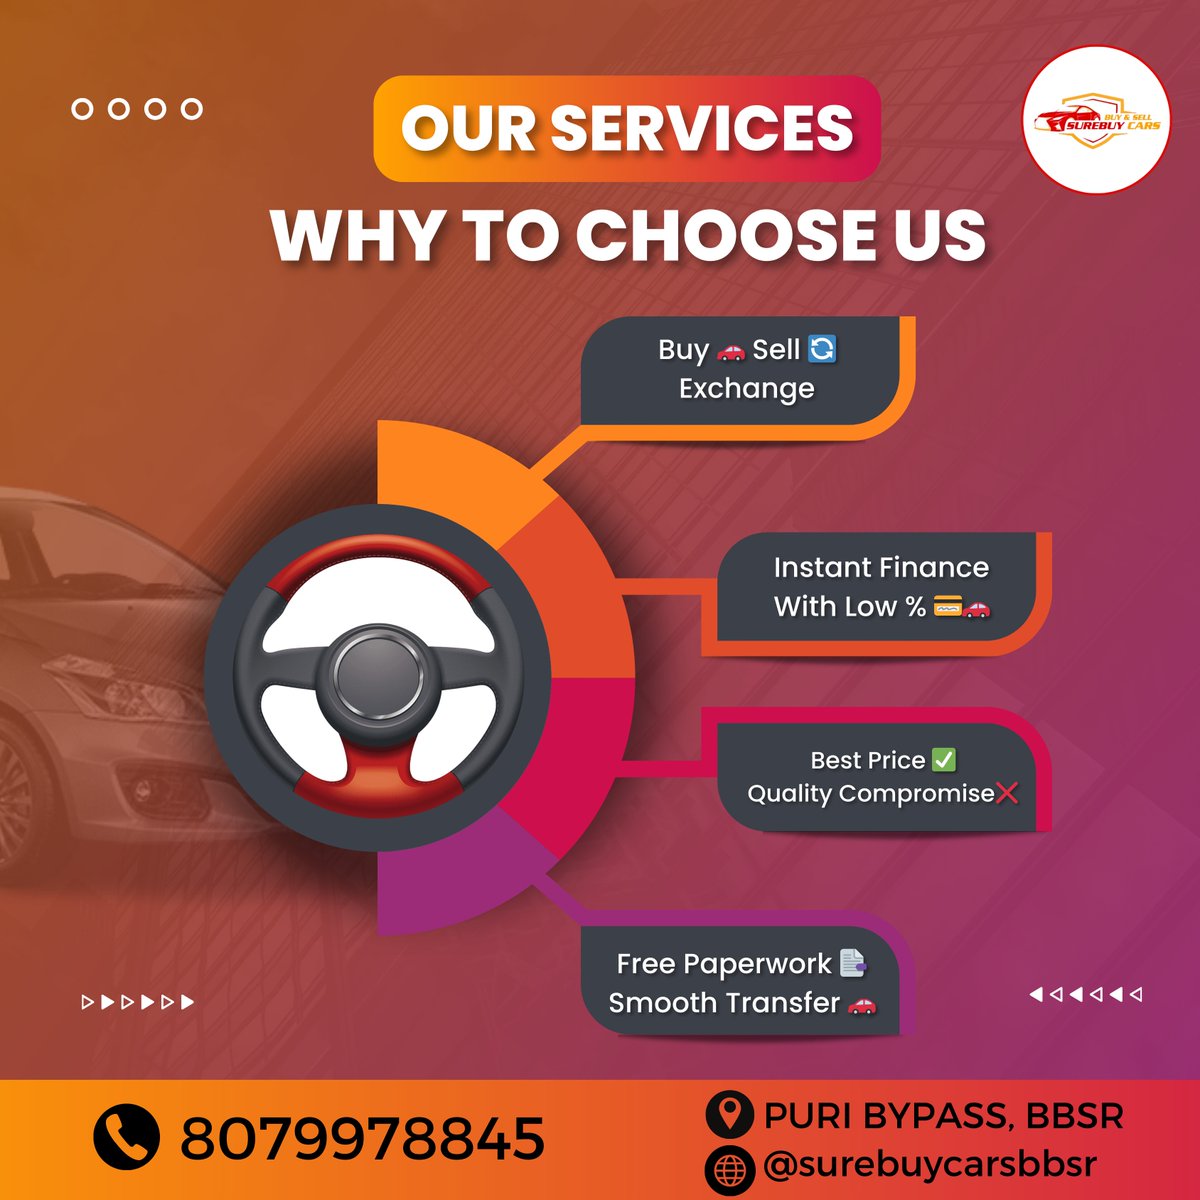 Here are the key factors why you should choose us to buy your dream used car 🚗

Call Us: 7656838313, 8079978835

: Plot No-117, Puri Bypass, Bhubaneswar

#SurebuyGroup #SurebuyCars #NewCollection #CarCollection #Maruti #Baleno #UsedCar #SecondHandCar #AffordableRide #Bhubaneswar